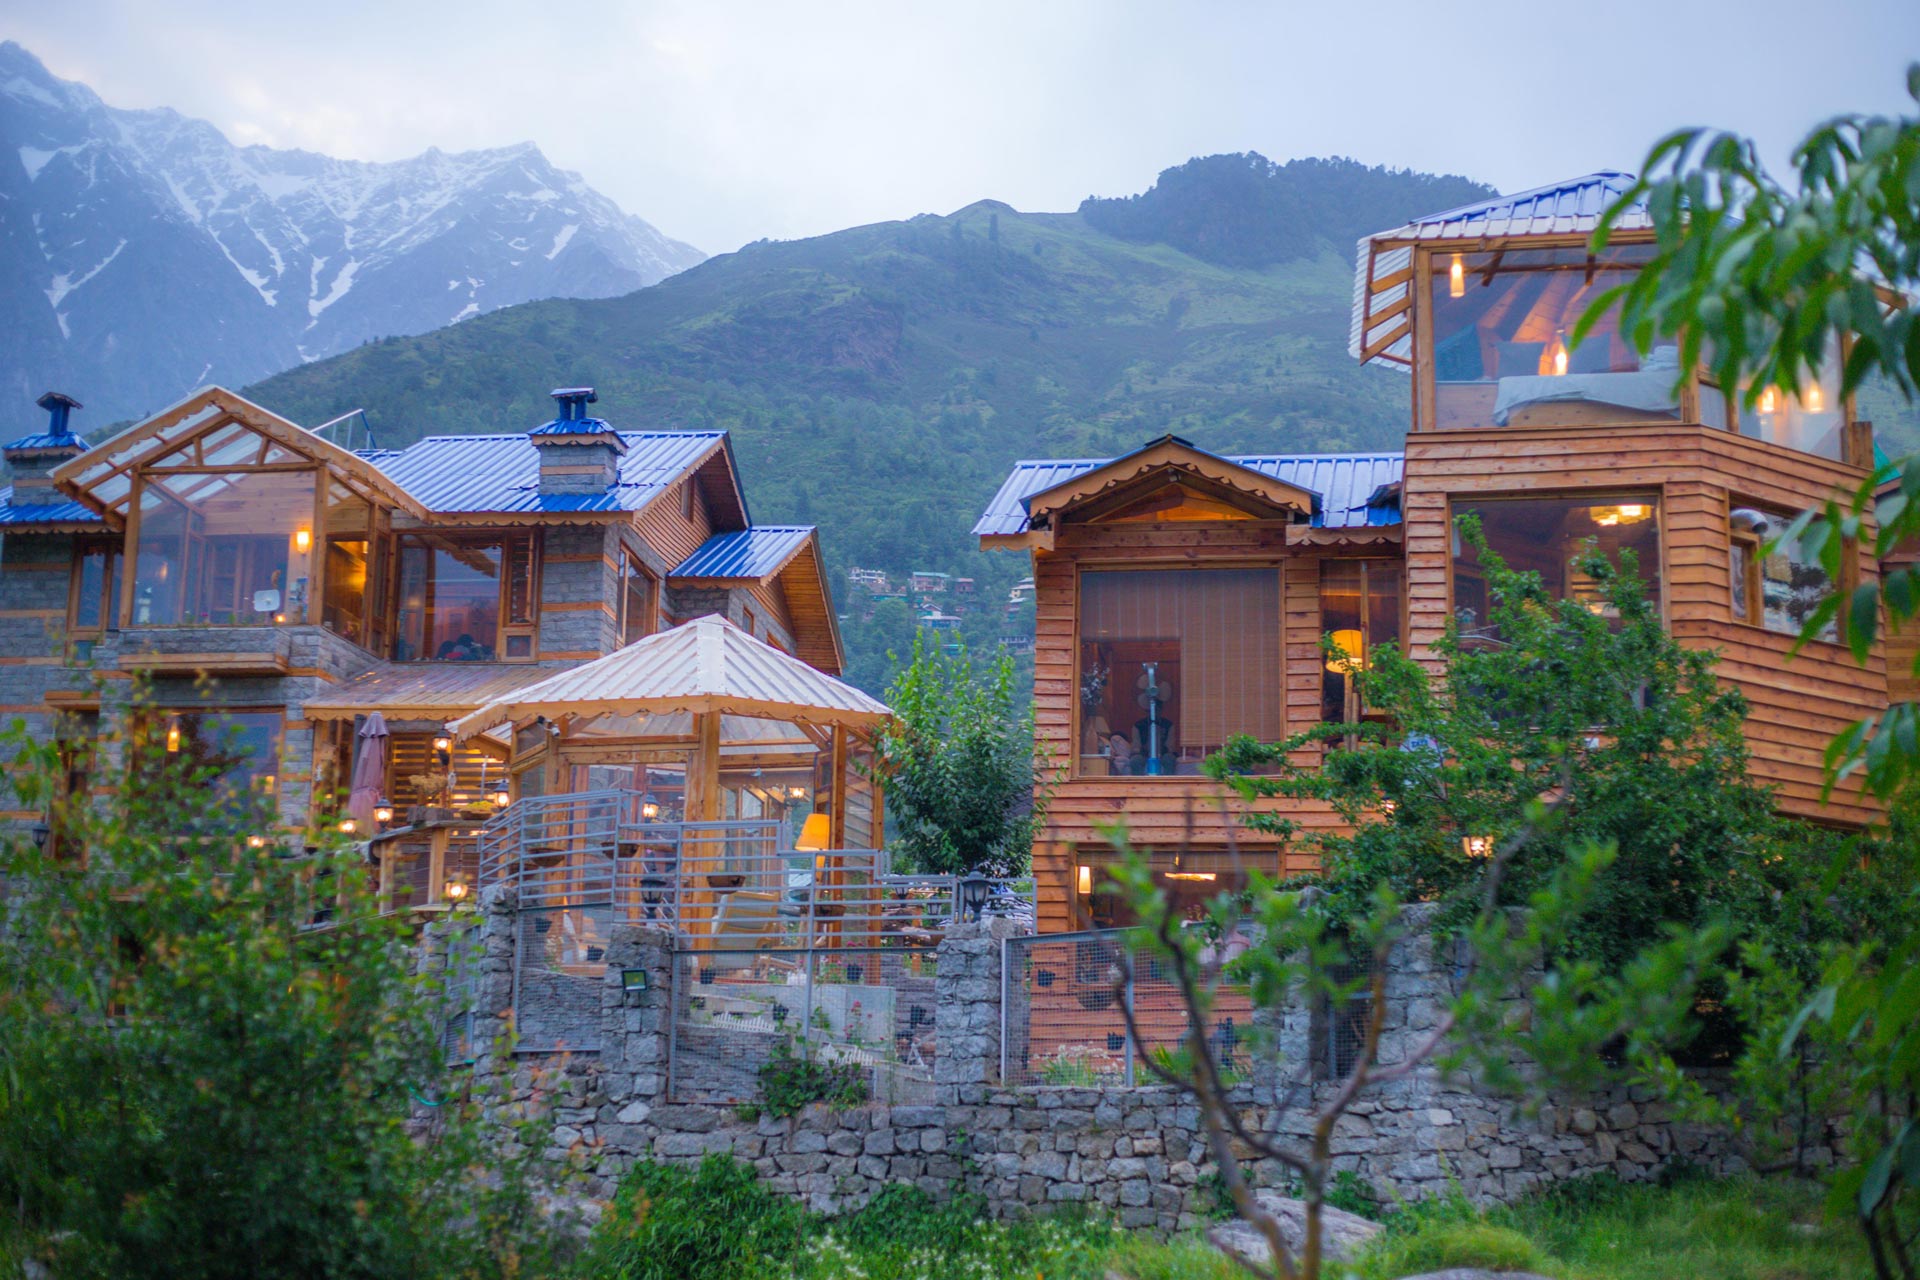 Cottage style villas in front of Himalayas